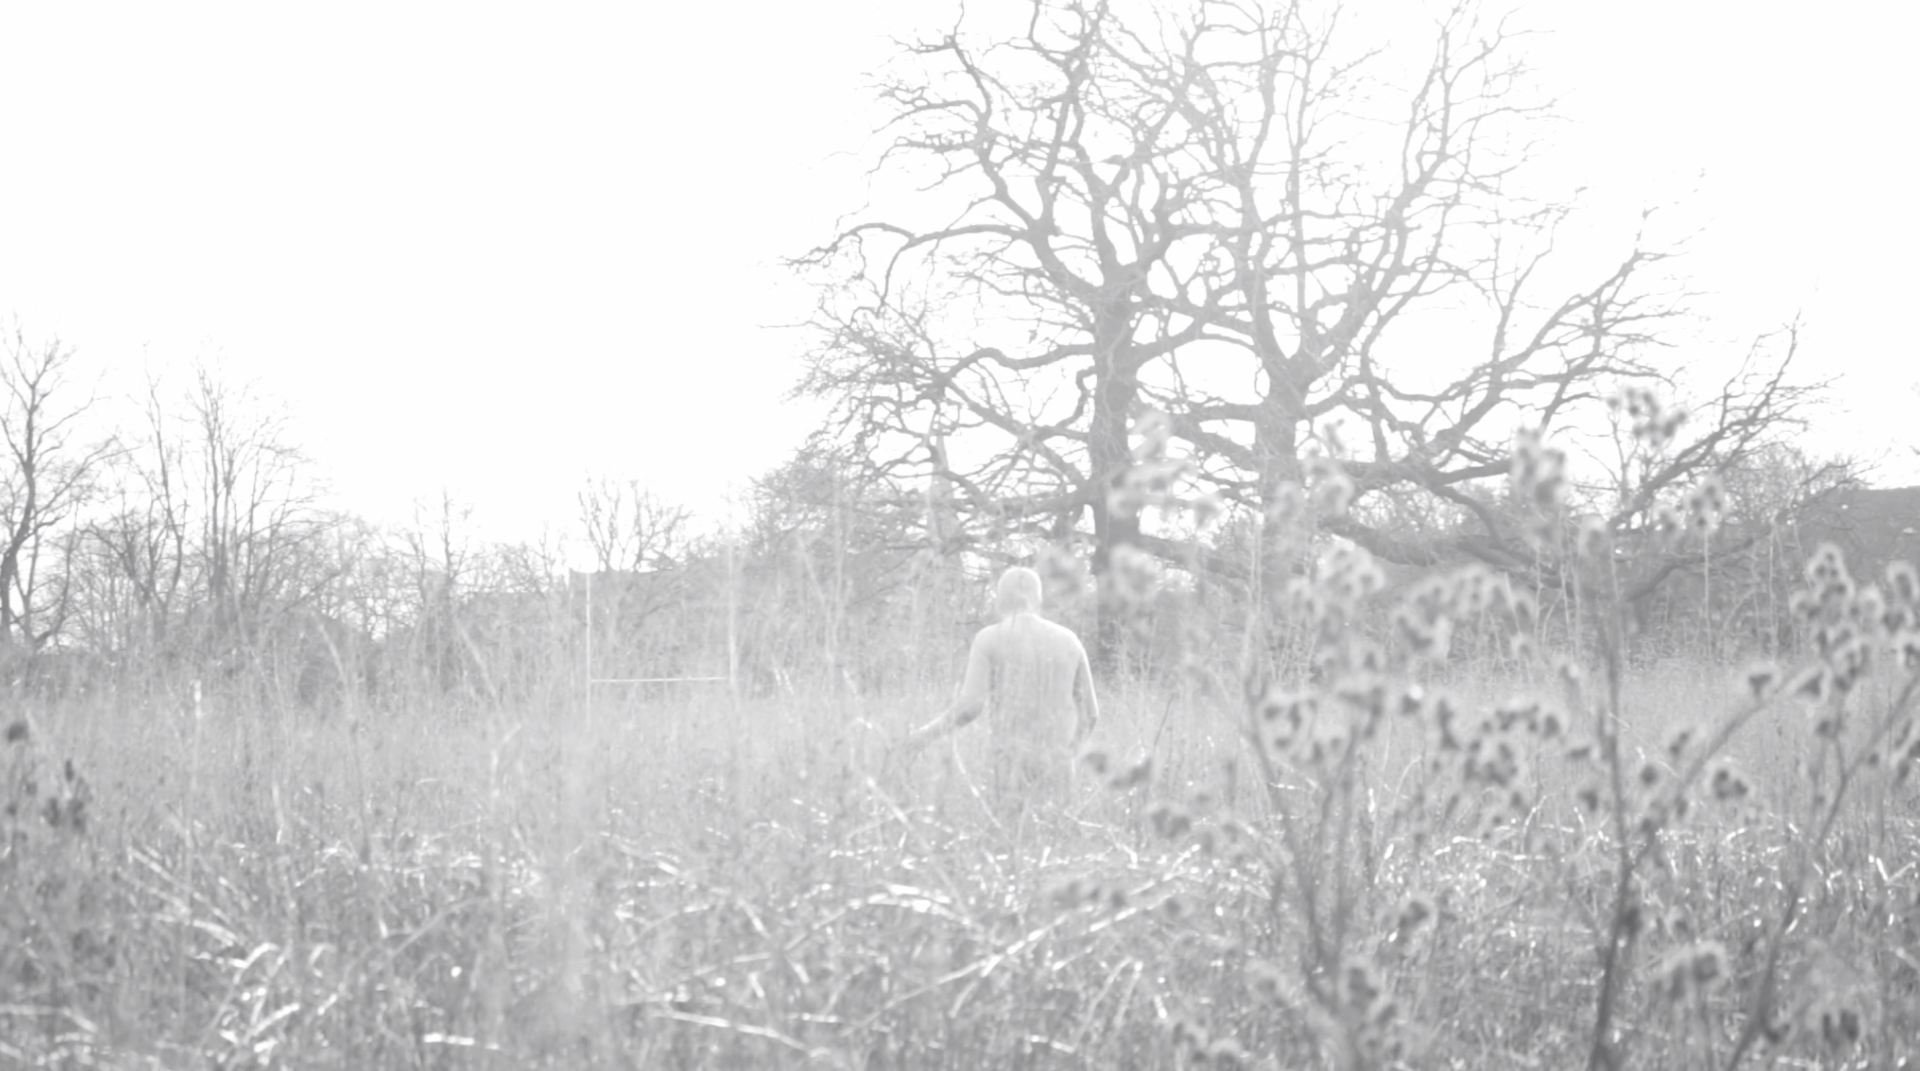 A greyscale video still of a person standing in a field.